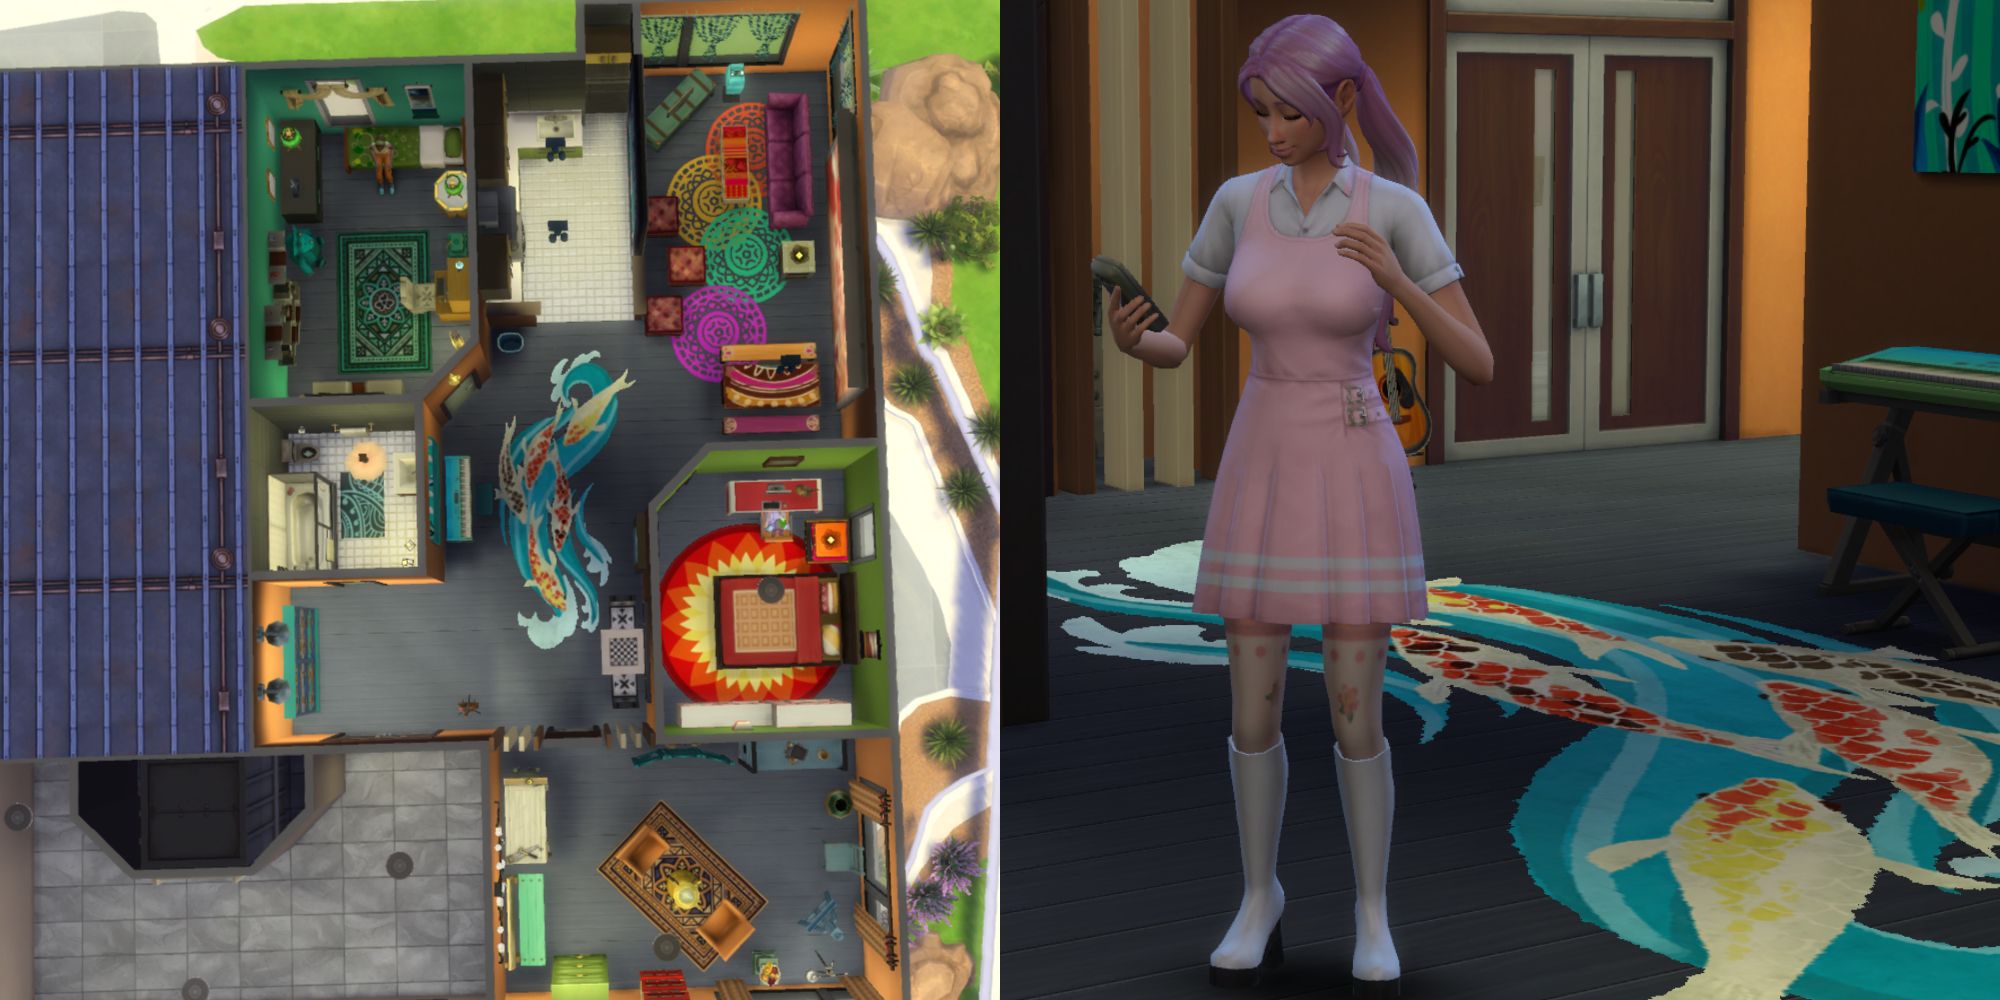 An interior decorator makes plans to upgrade a client's apartment in The Sims 4